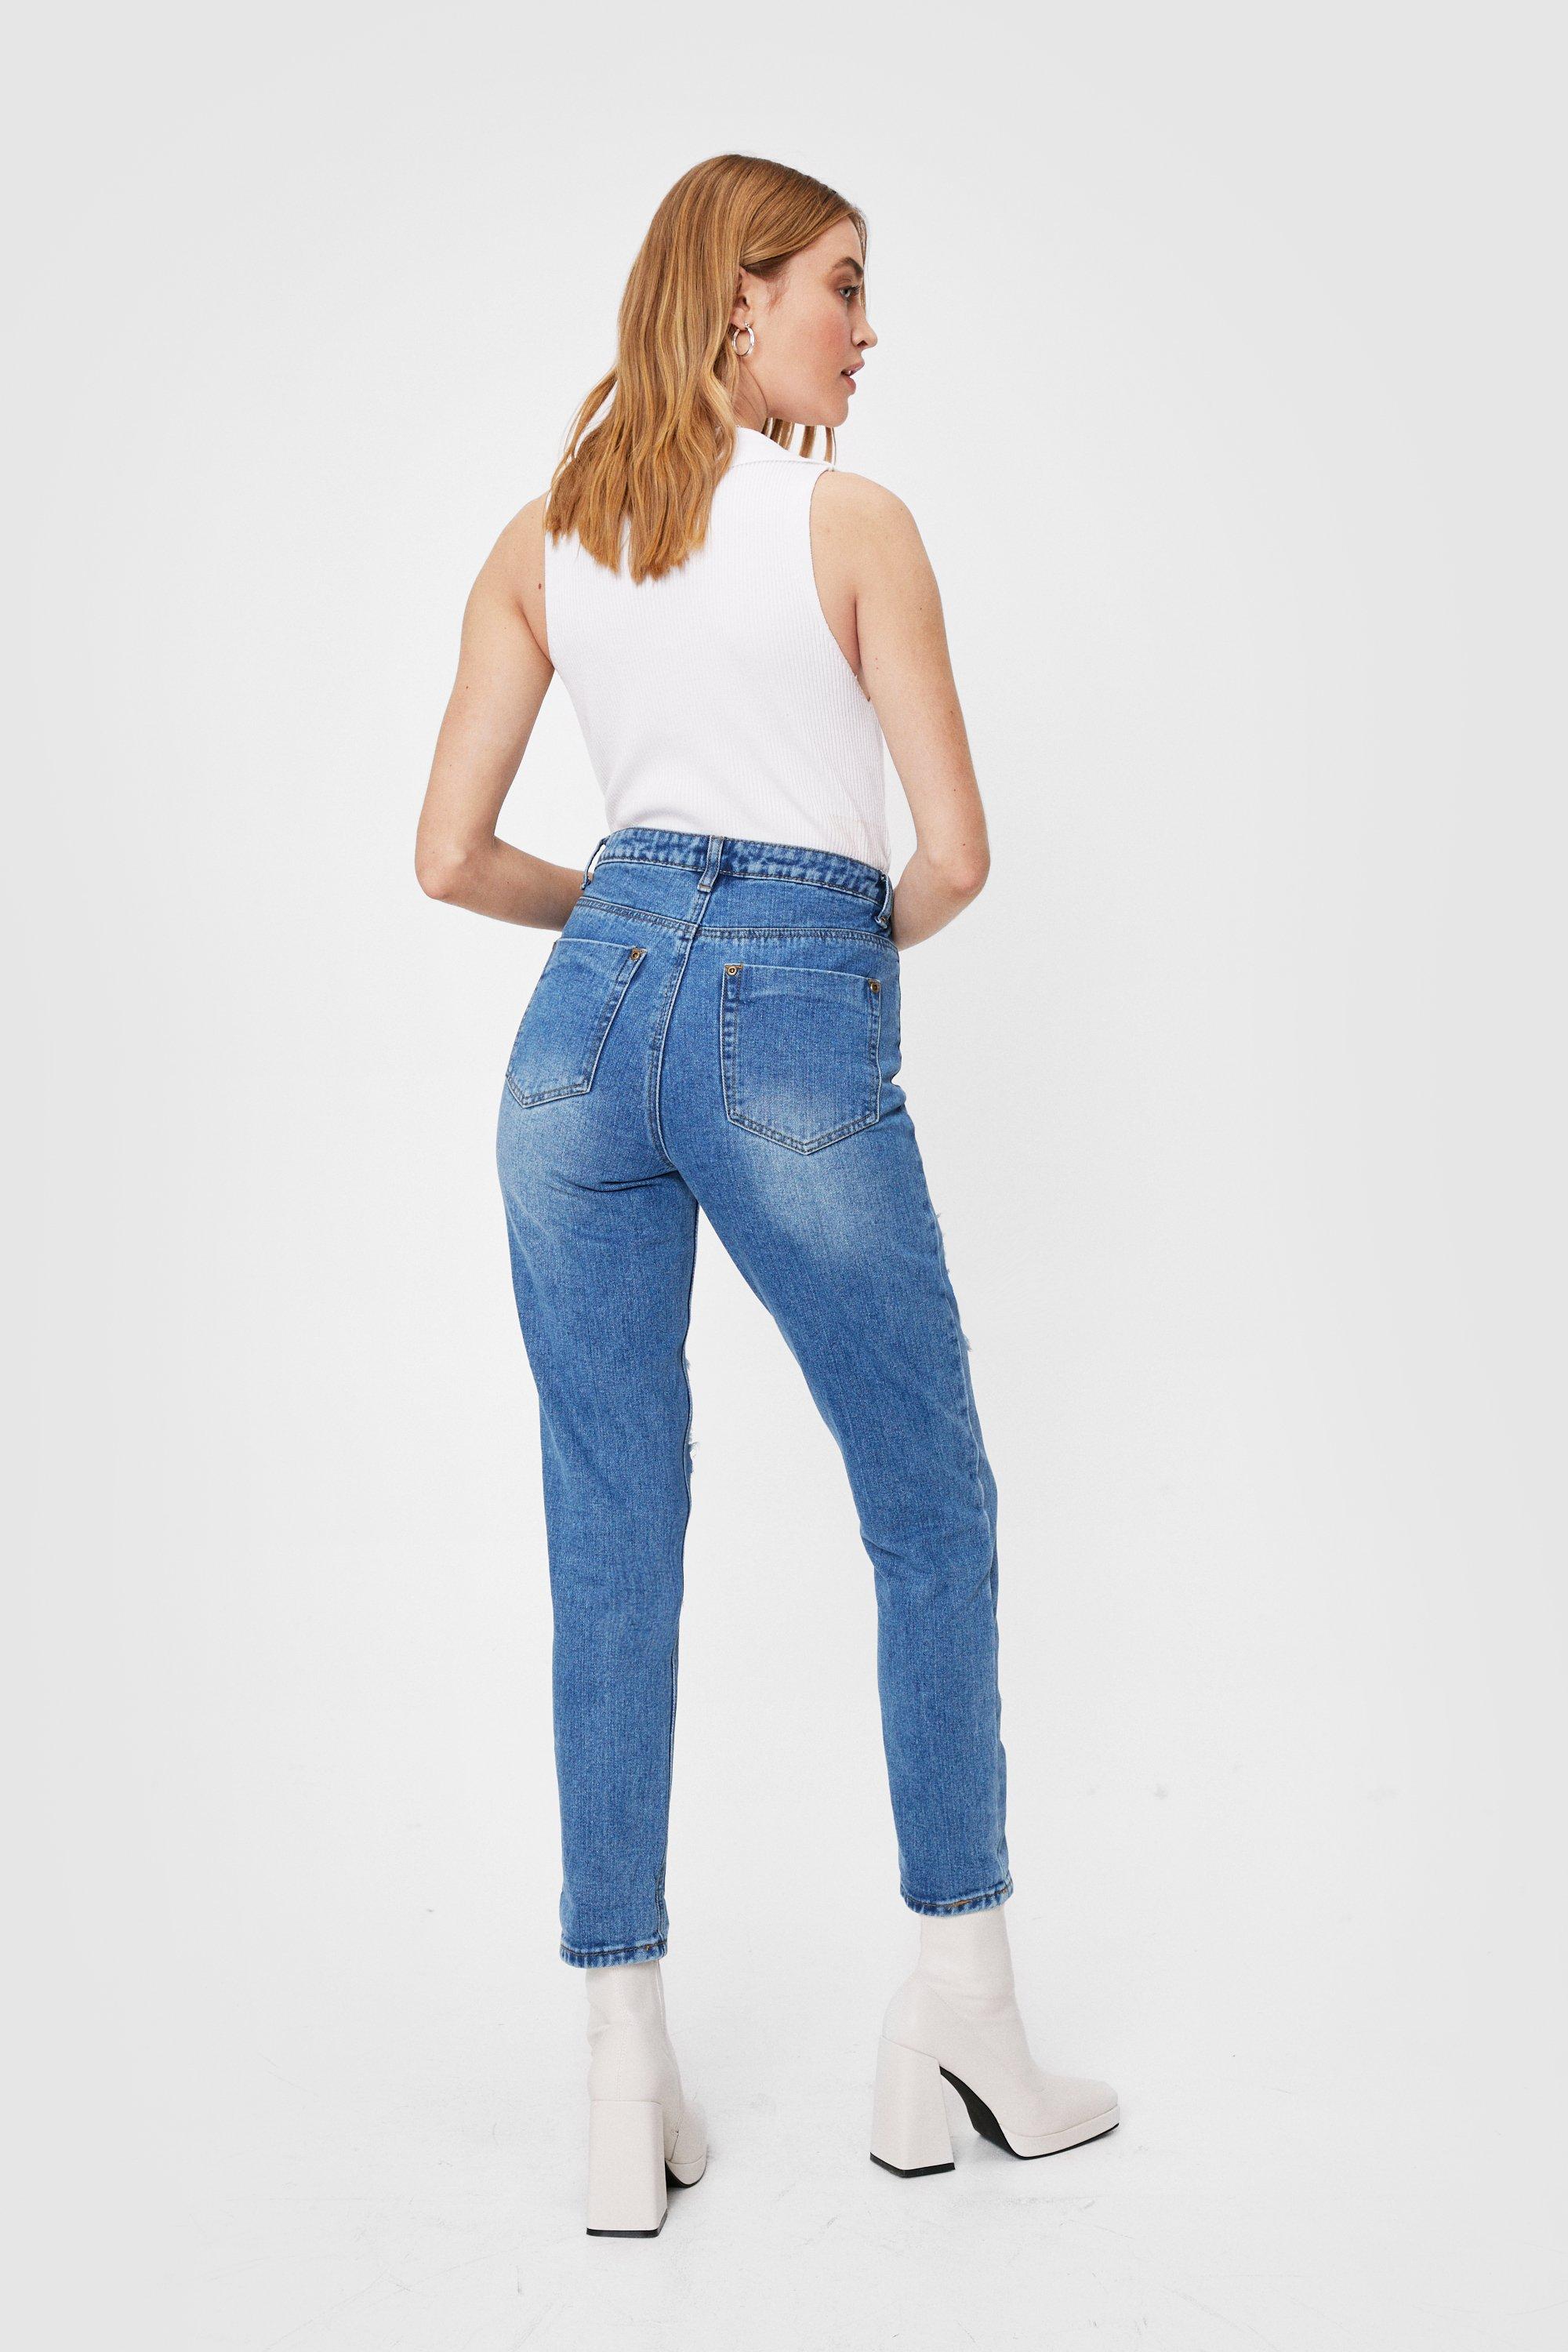 distressed mom jeans outfit